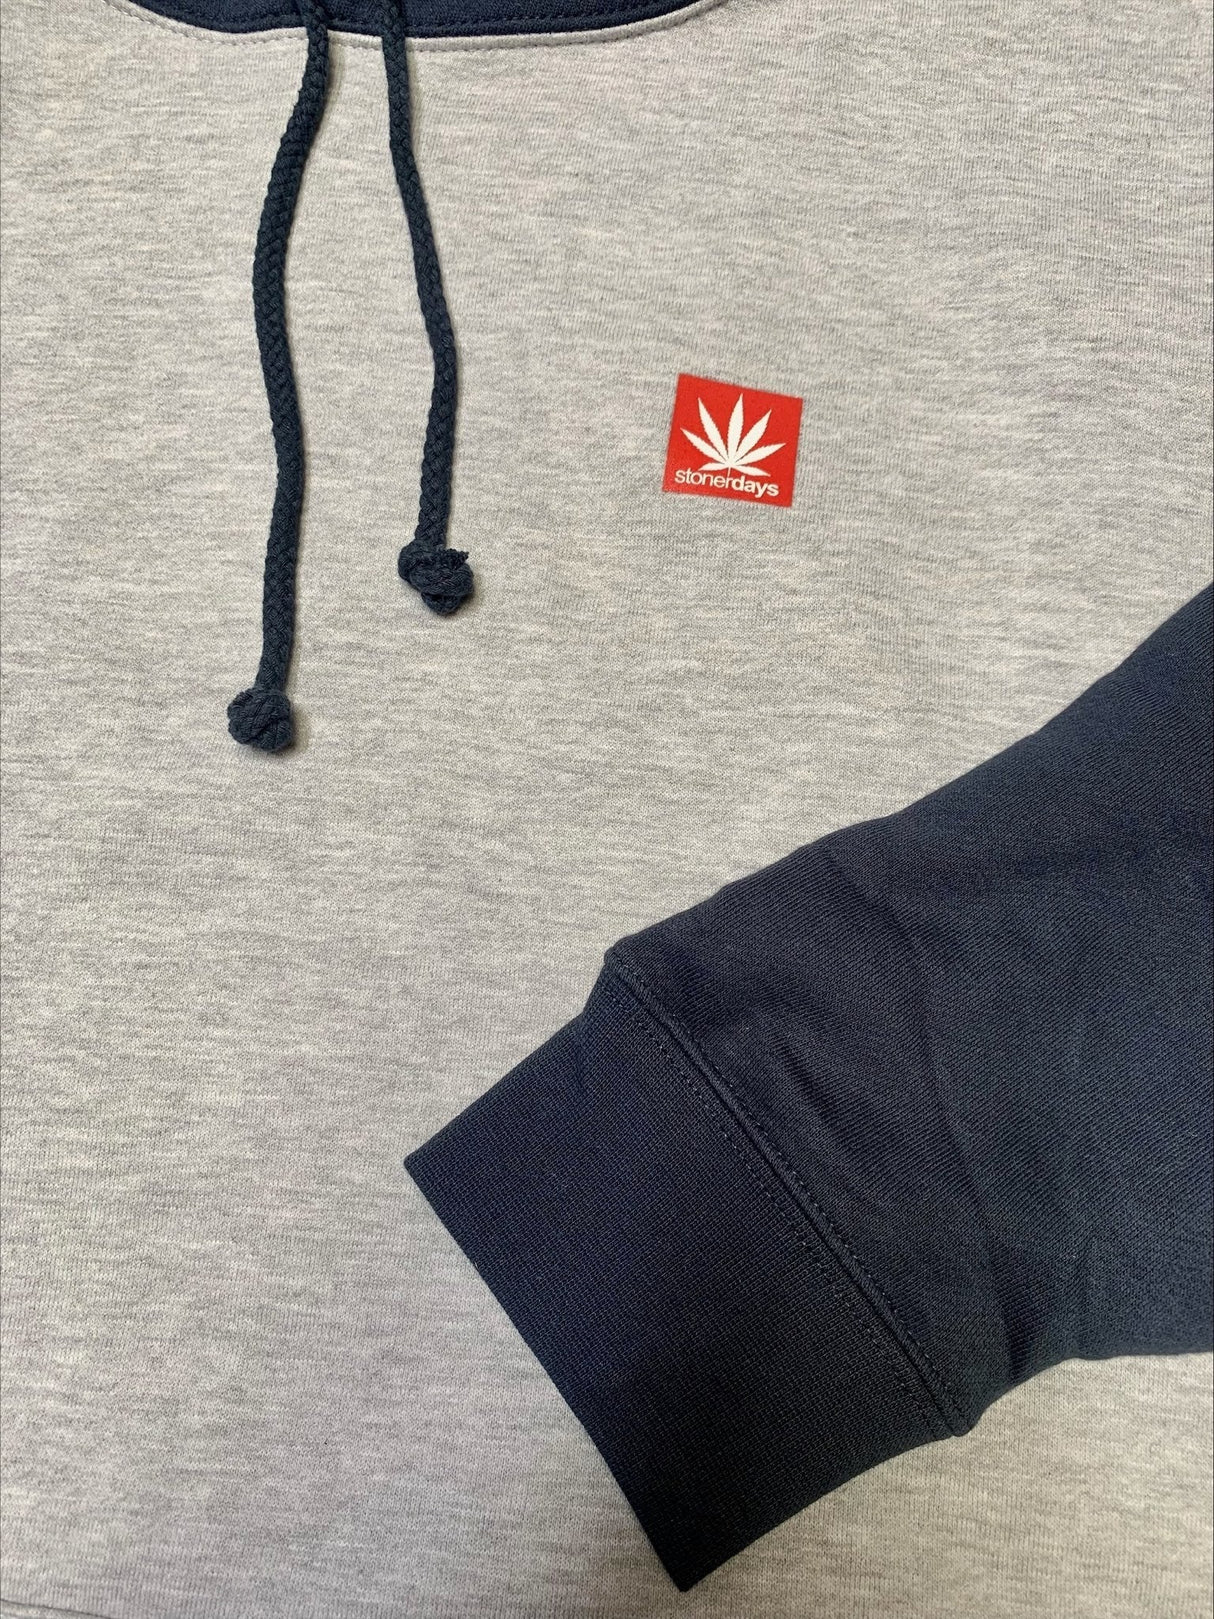 Close-up of StonerDays Two Tone Hoodie in small, showcasing logo and high-quality cotton blend